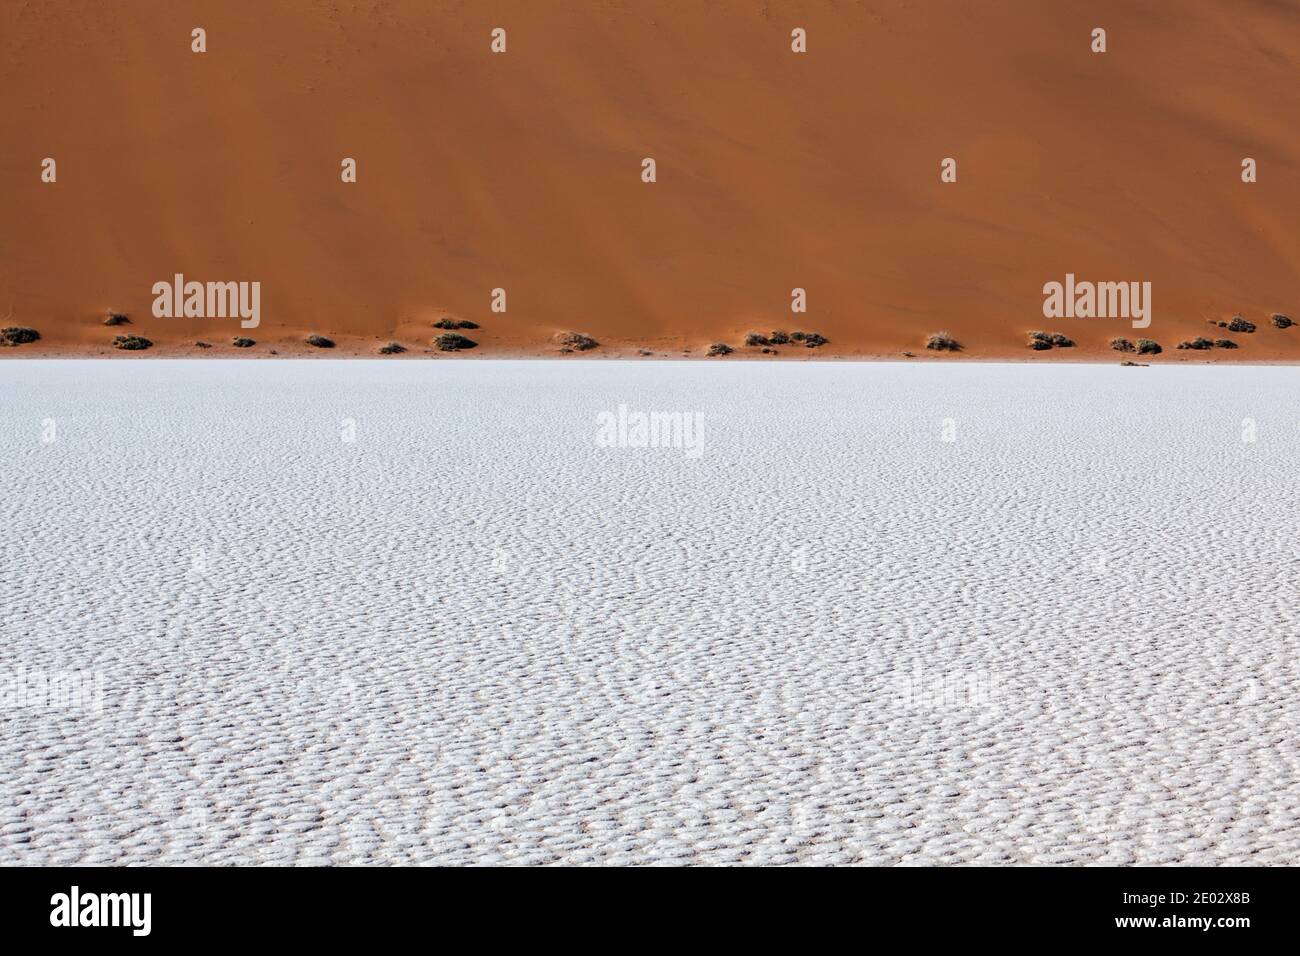 Parched ground in Deadvlei Pan, Namib Naukluft Park, Namibia Stock Photo